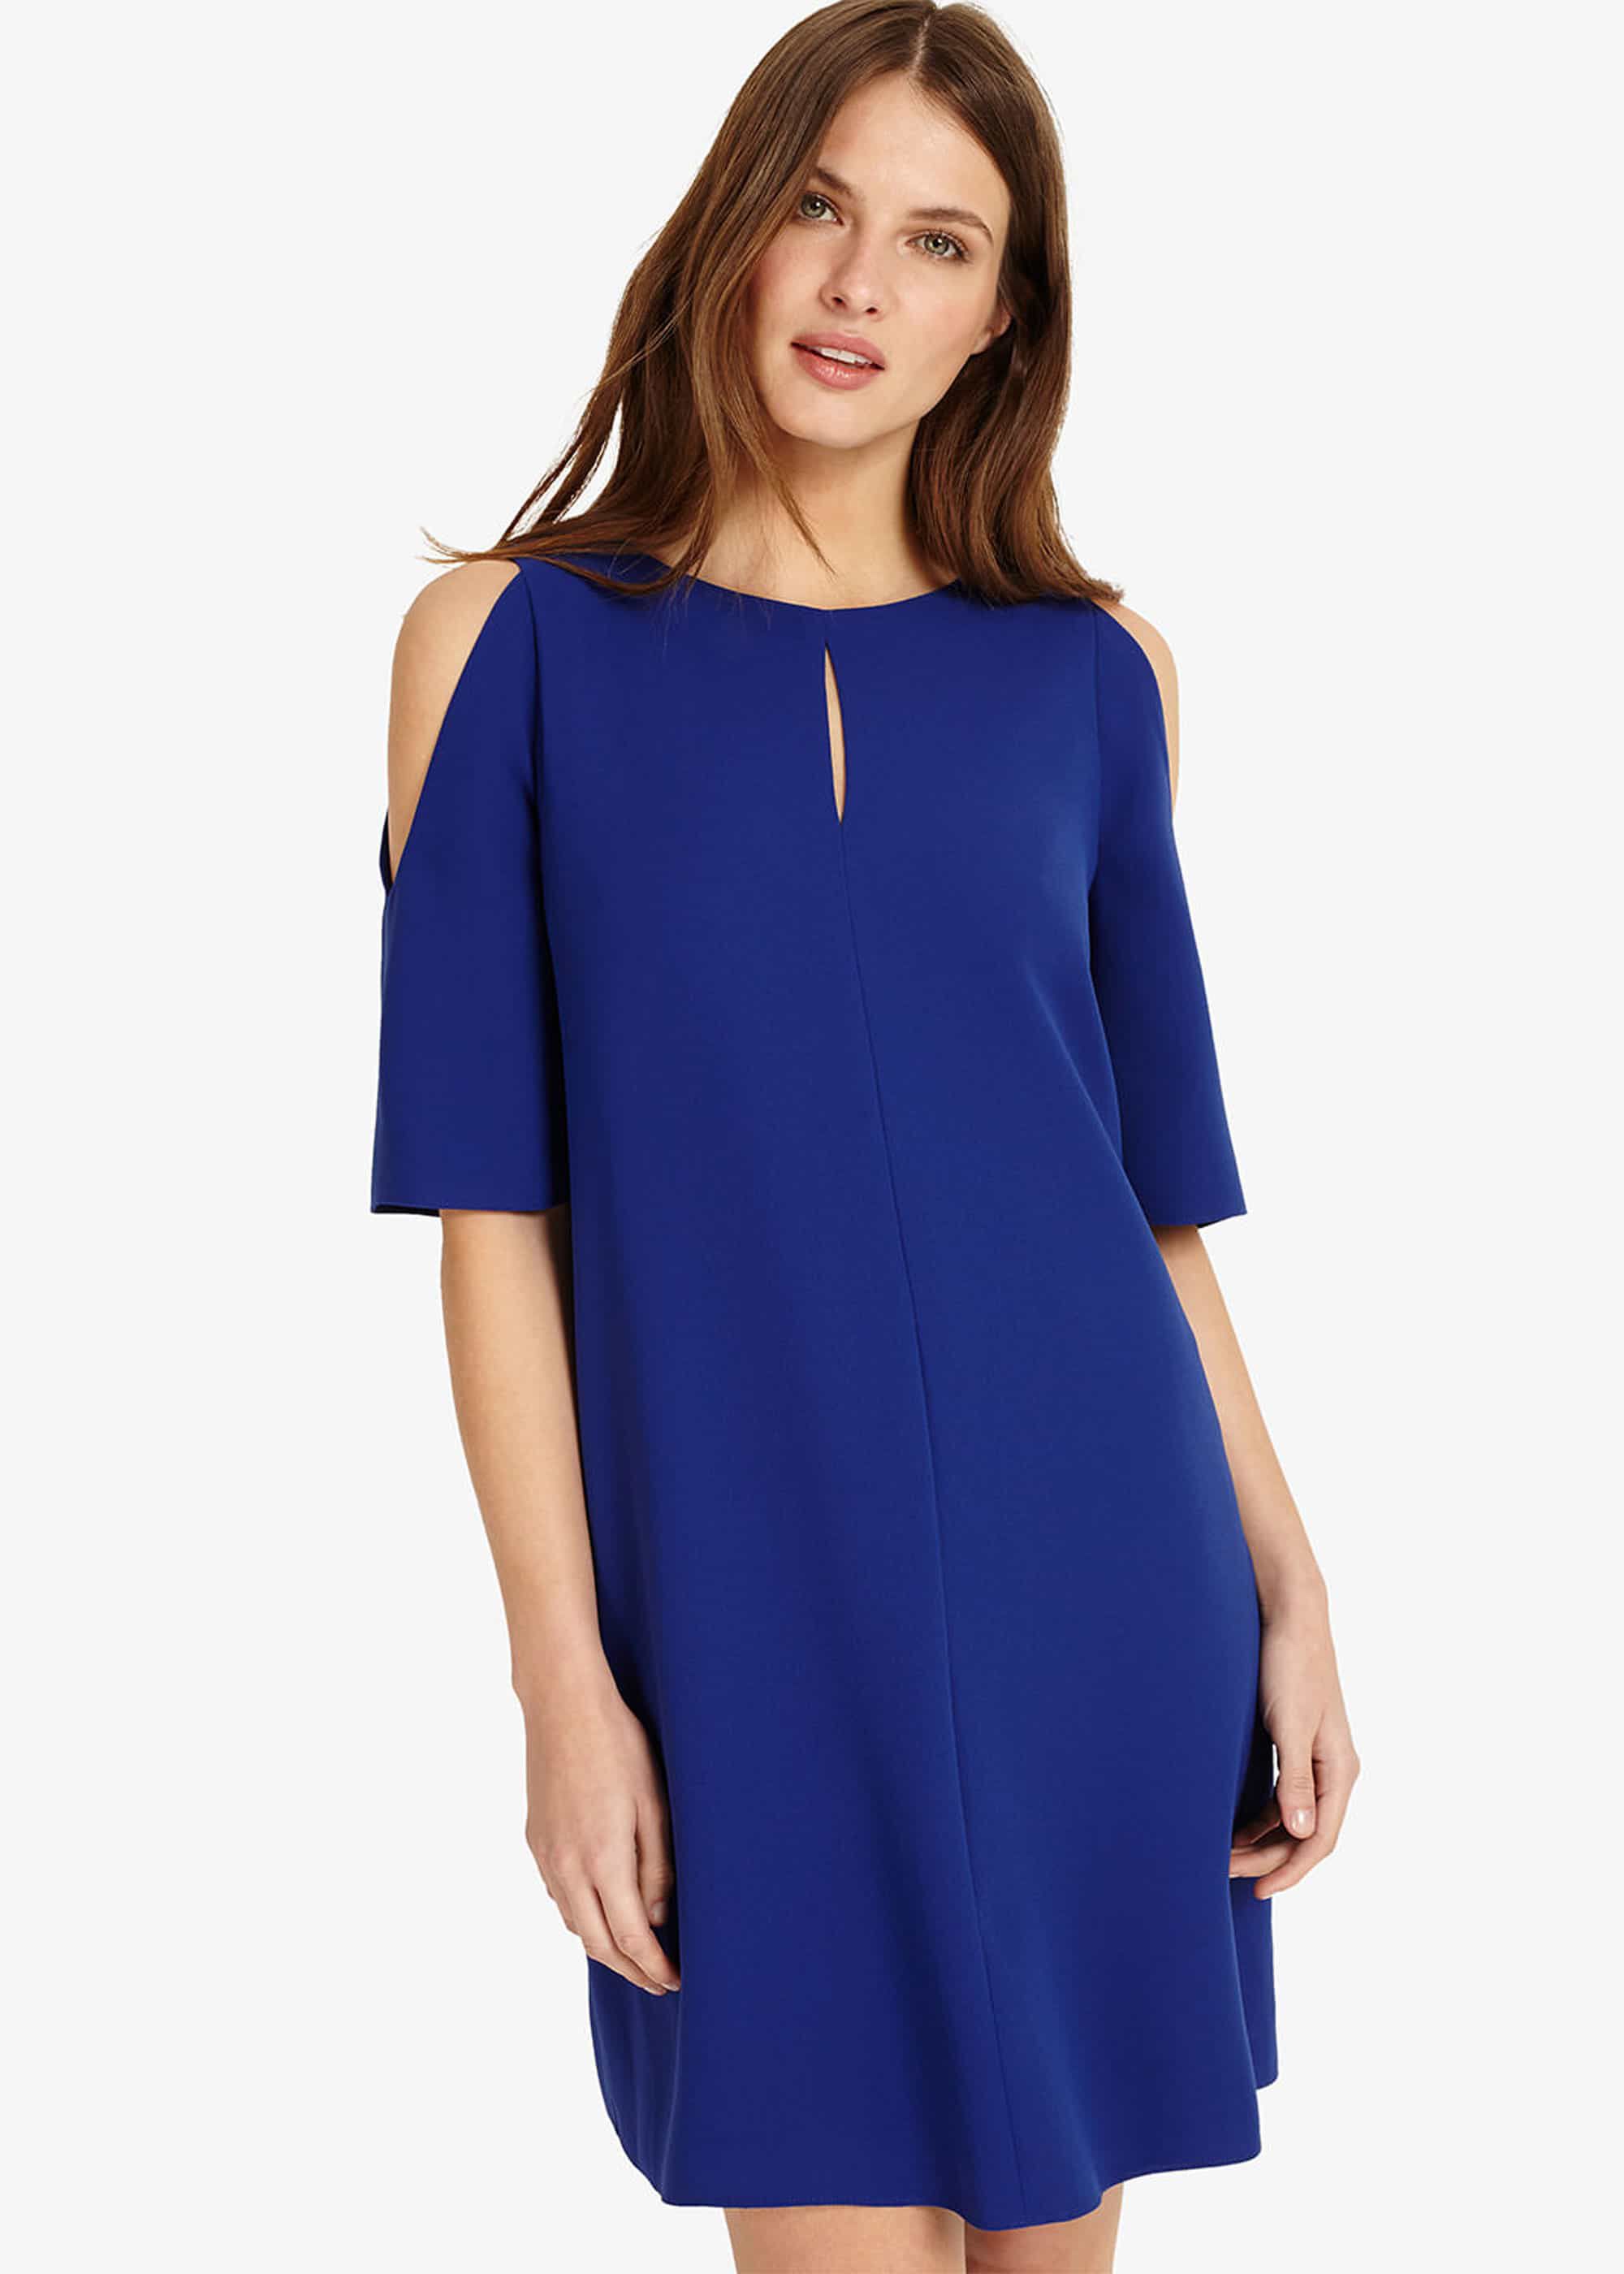 Jilly Cold Shoulder Dress | Phase Eight